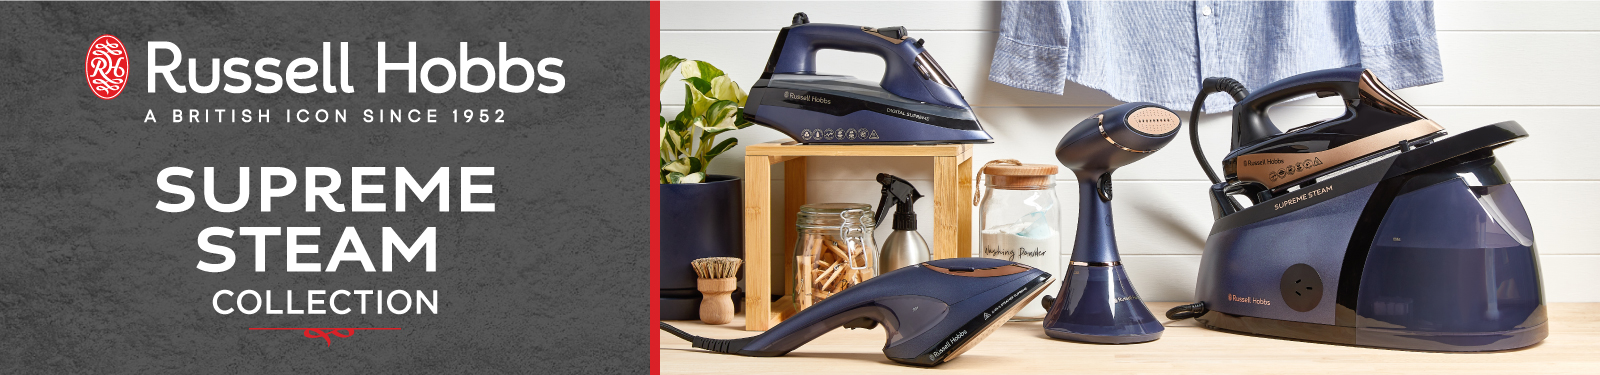 Russell Hobbs Supreme Steam Collection